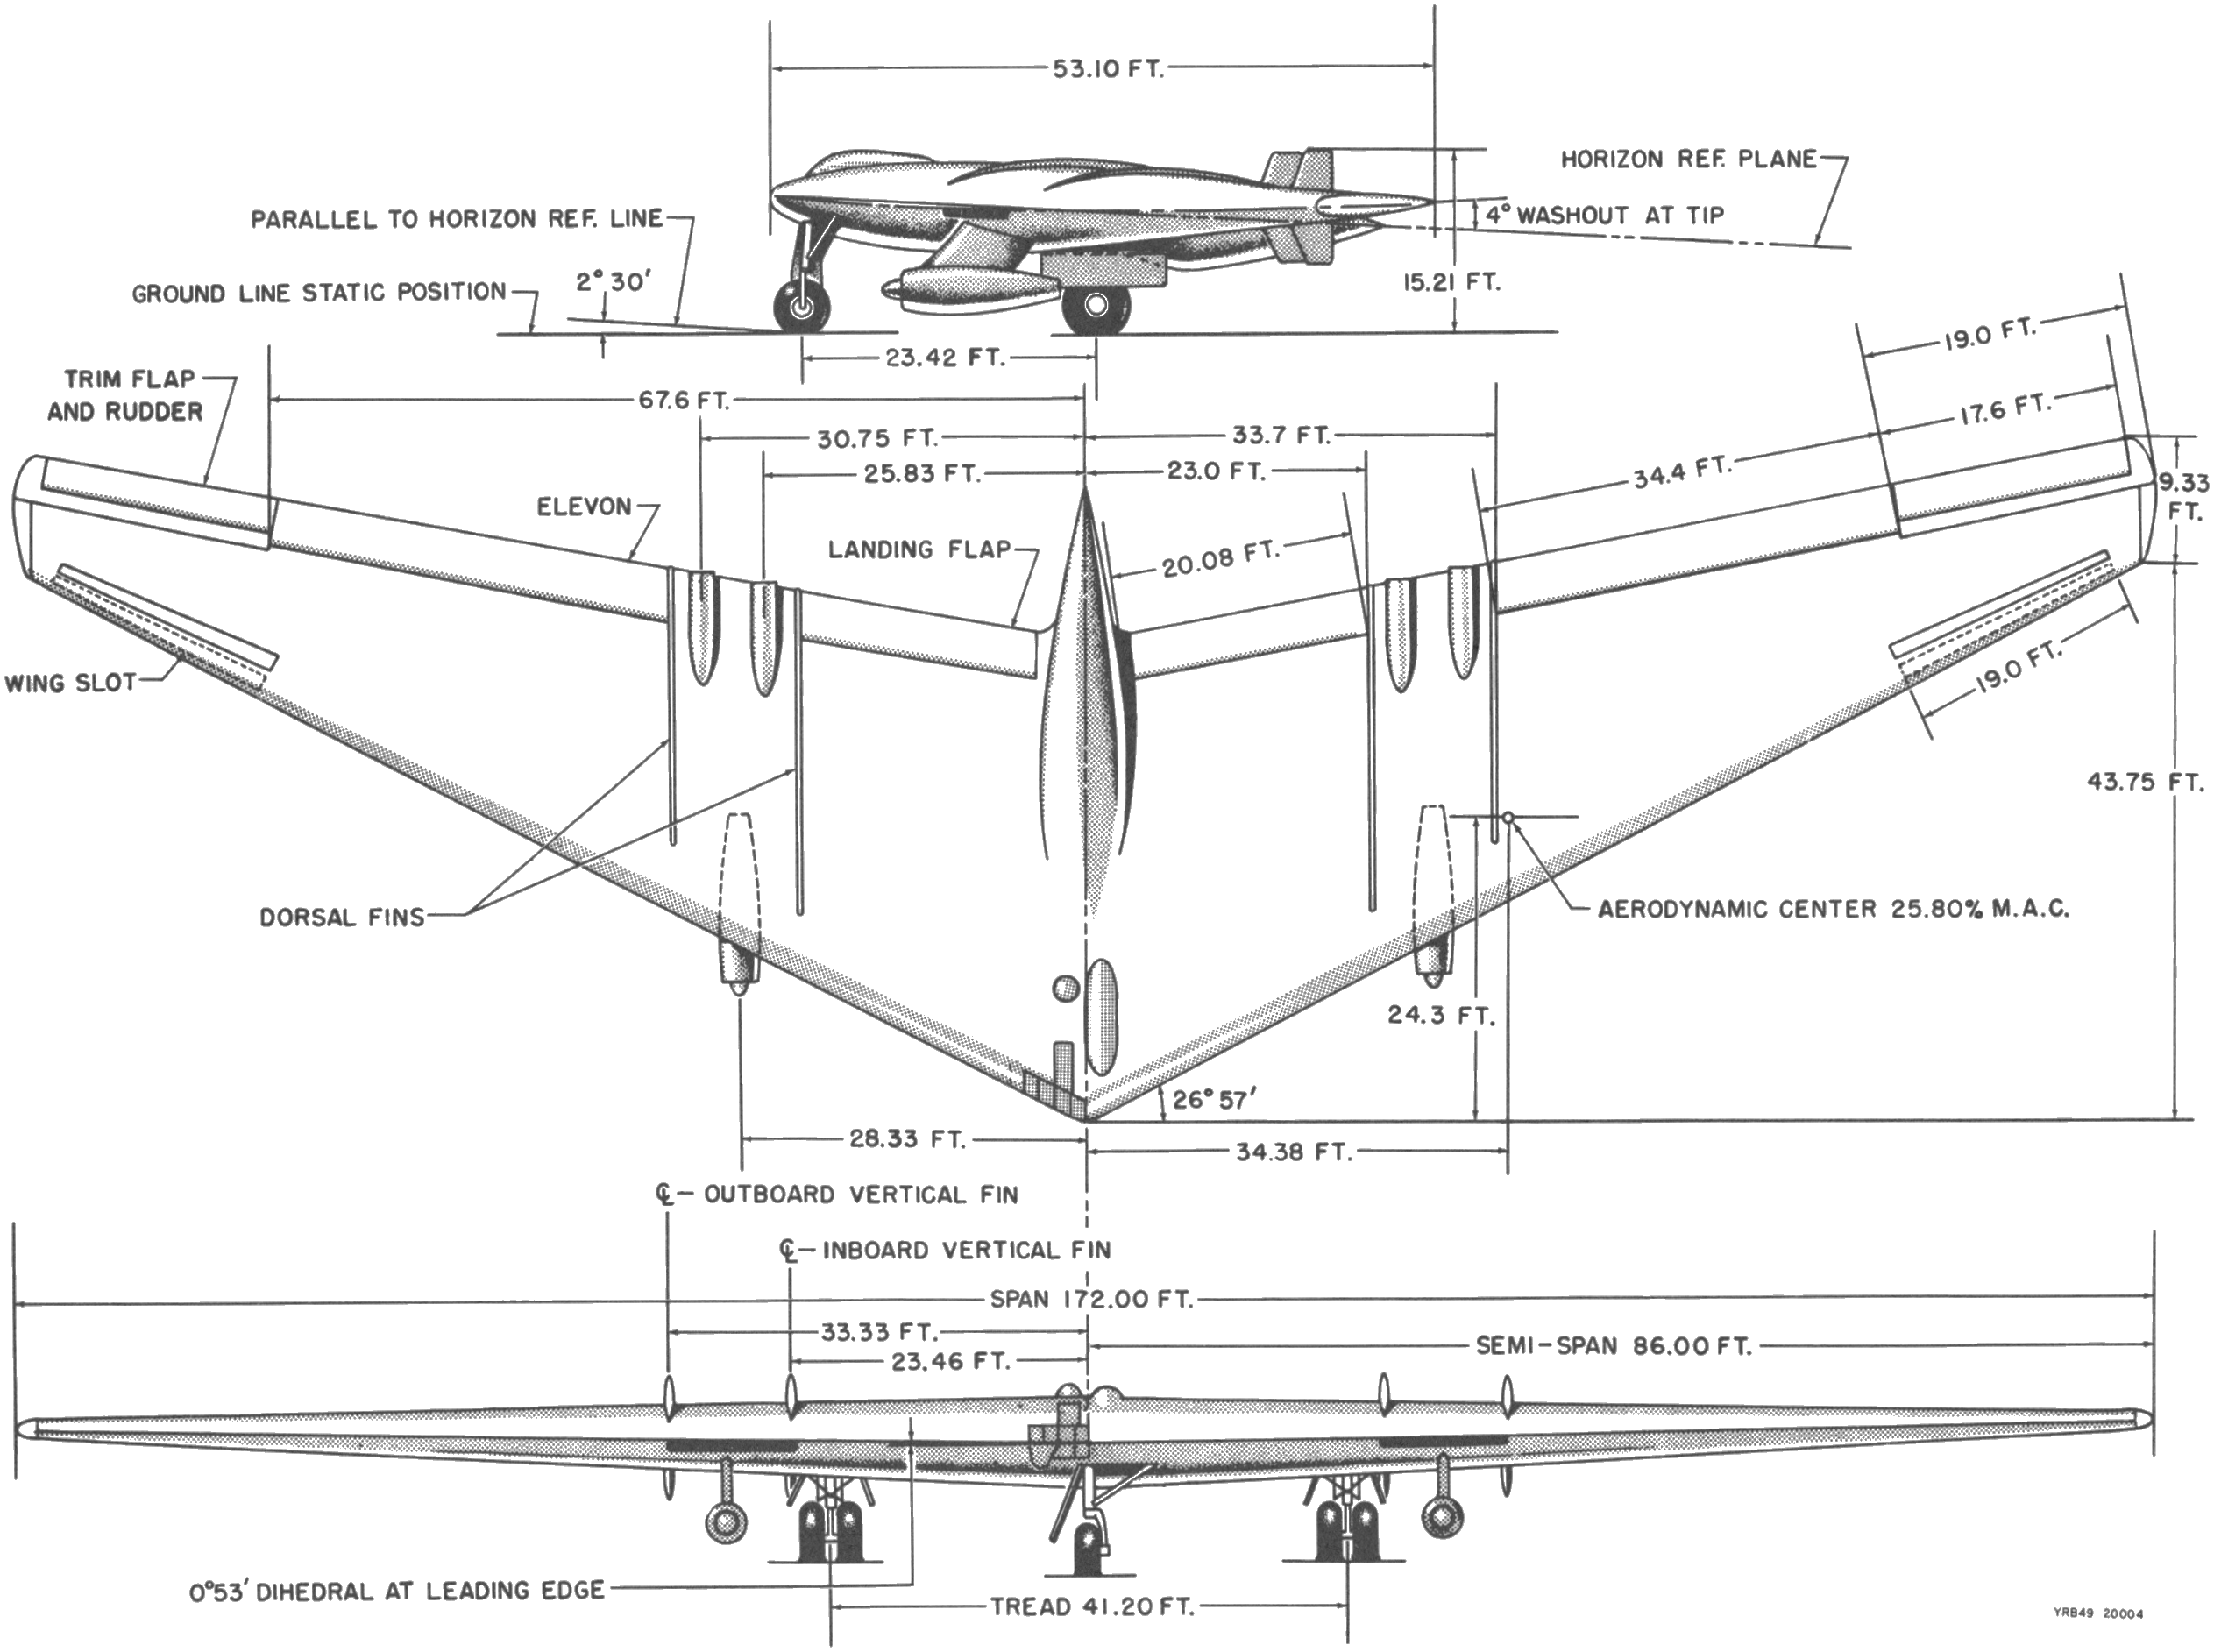 A 3-view line drawing of the Northrop YRB-49A